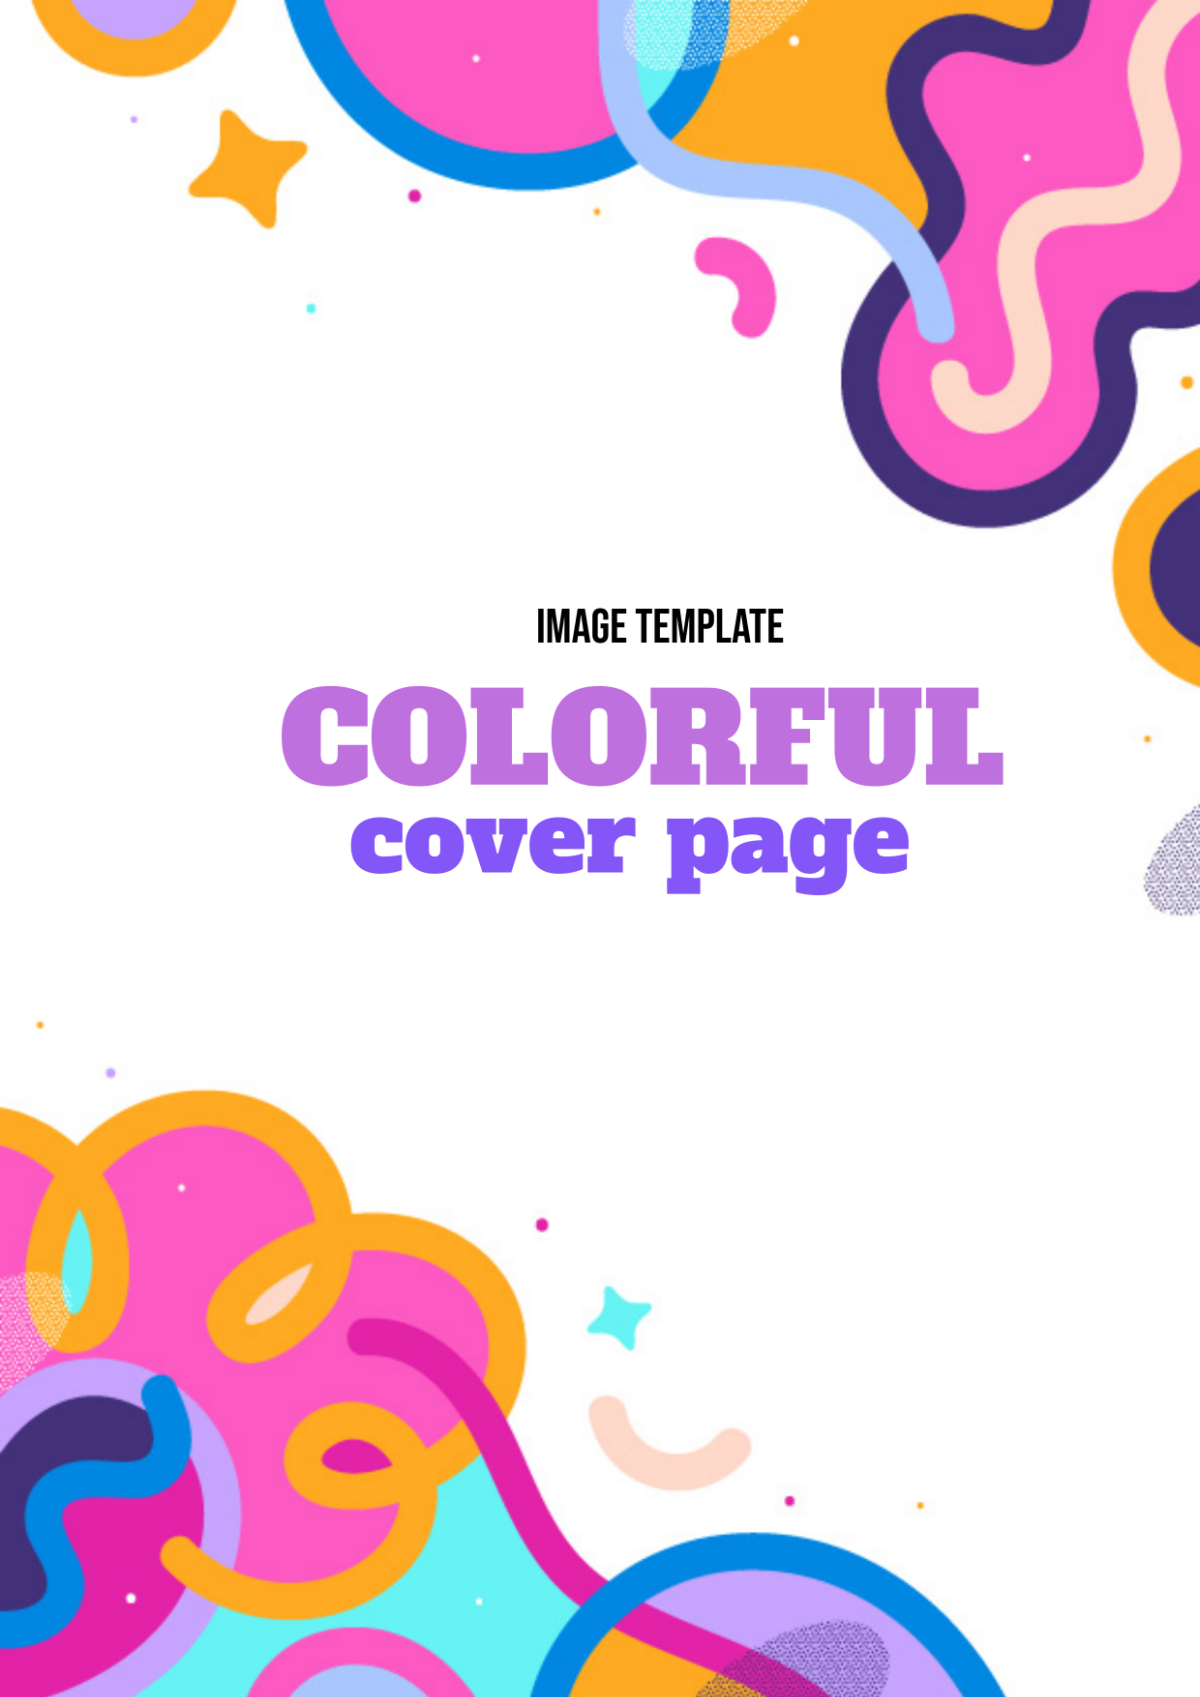 Free Colorful Cover Page Image Template